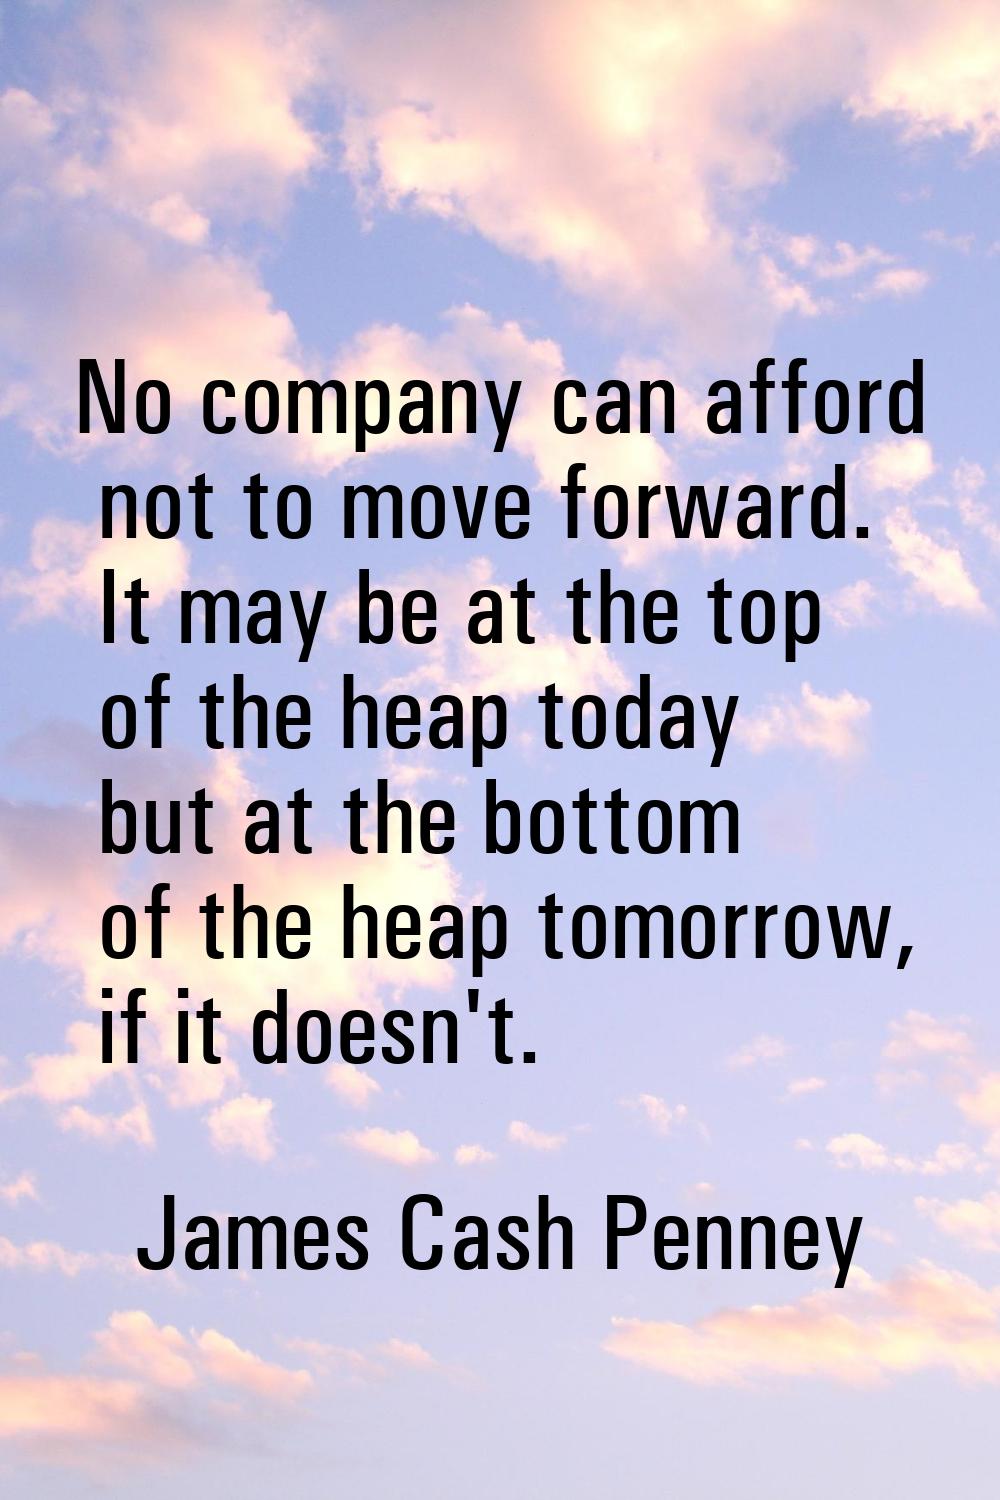 No company can afford not to move forward. It may be at the top of the heap today but at the bottom